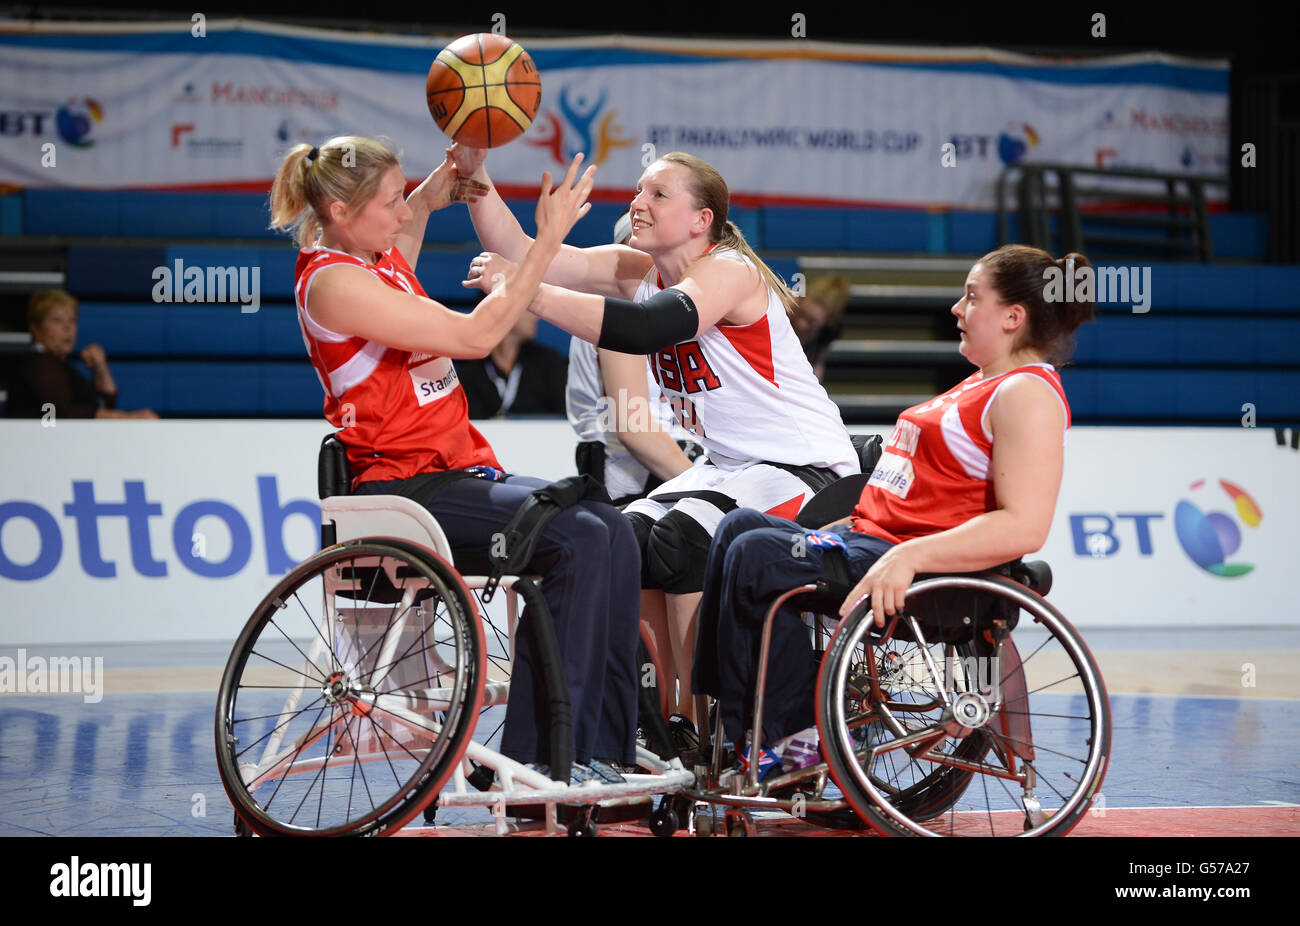 Match action from the women's wheelchair basketball match between Great Britain and USA at the BT Paralympic World Cup Stock Photo